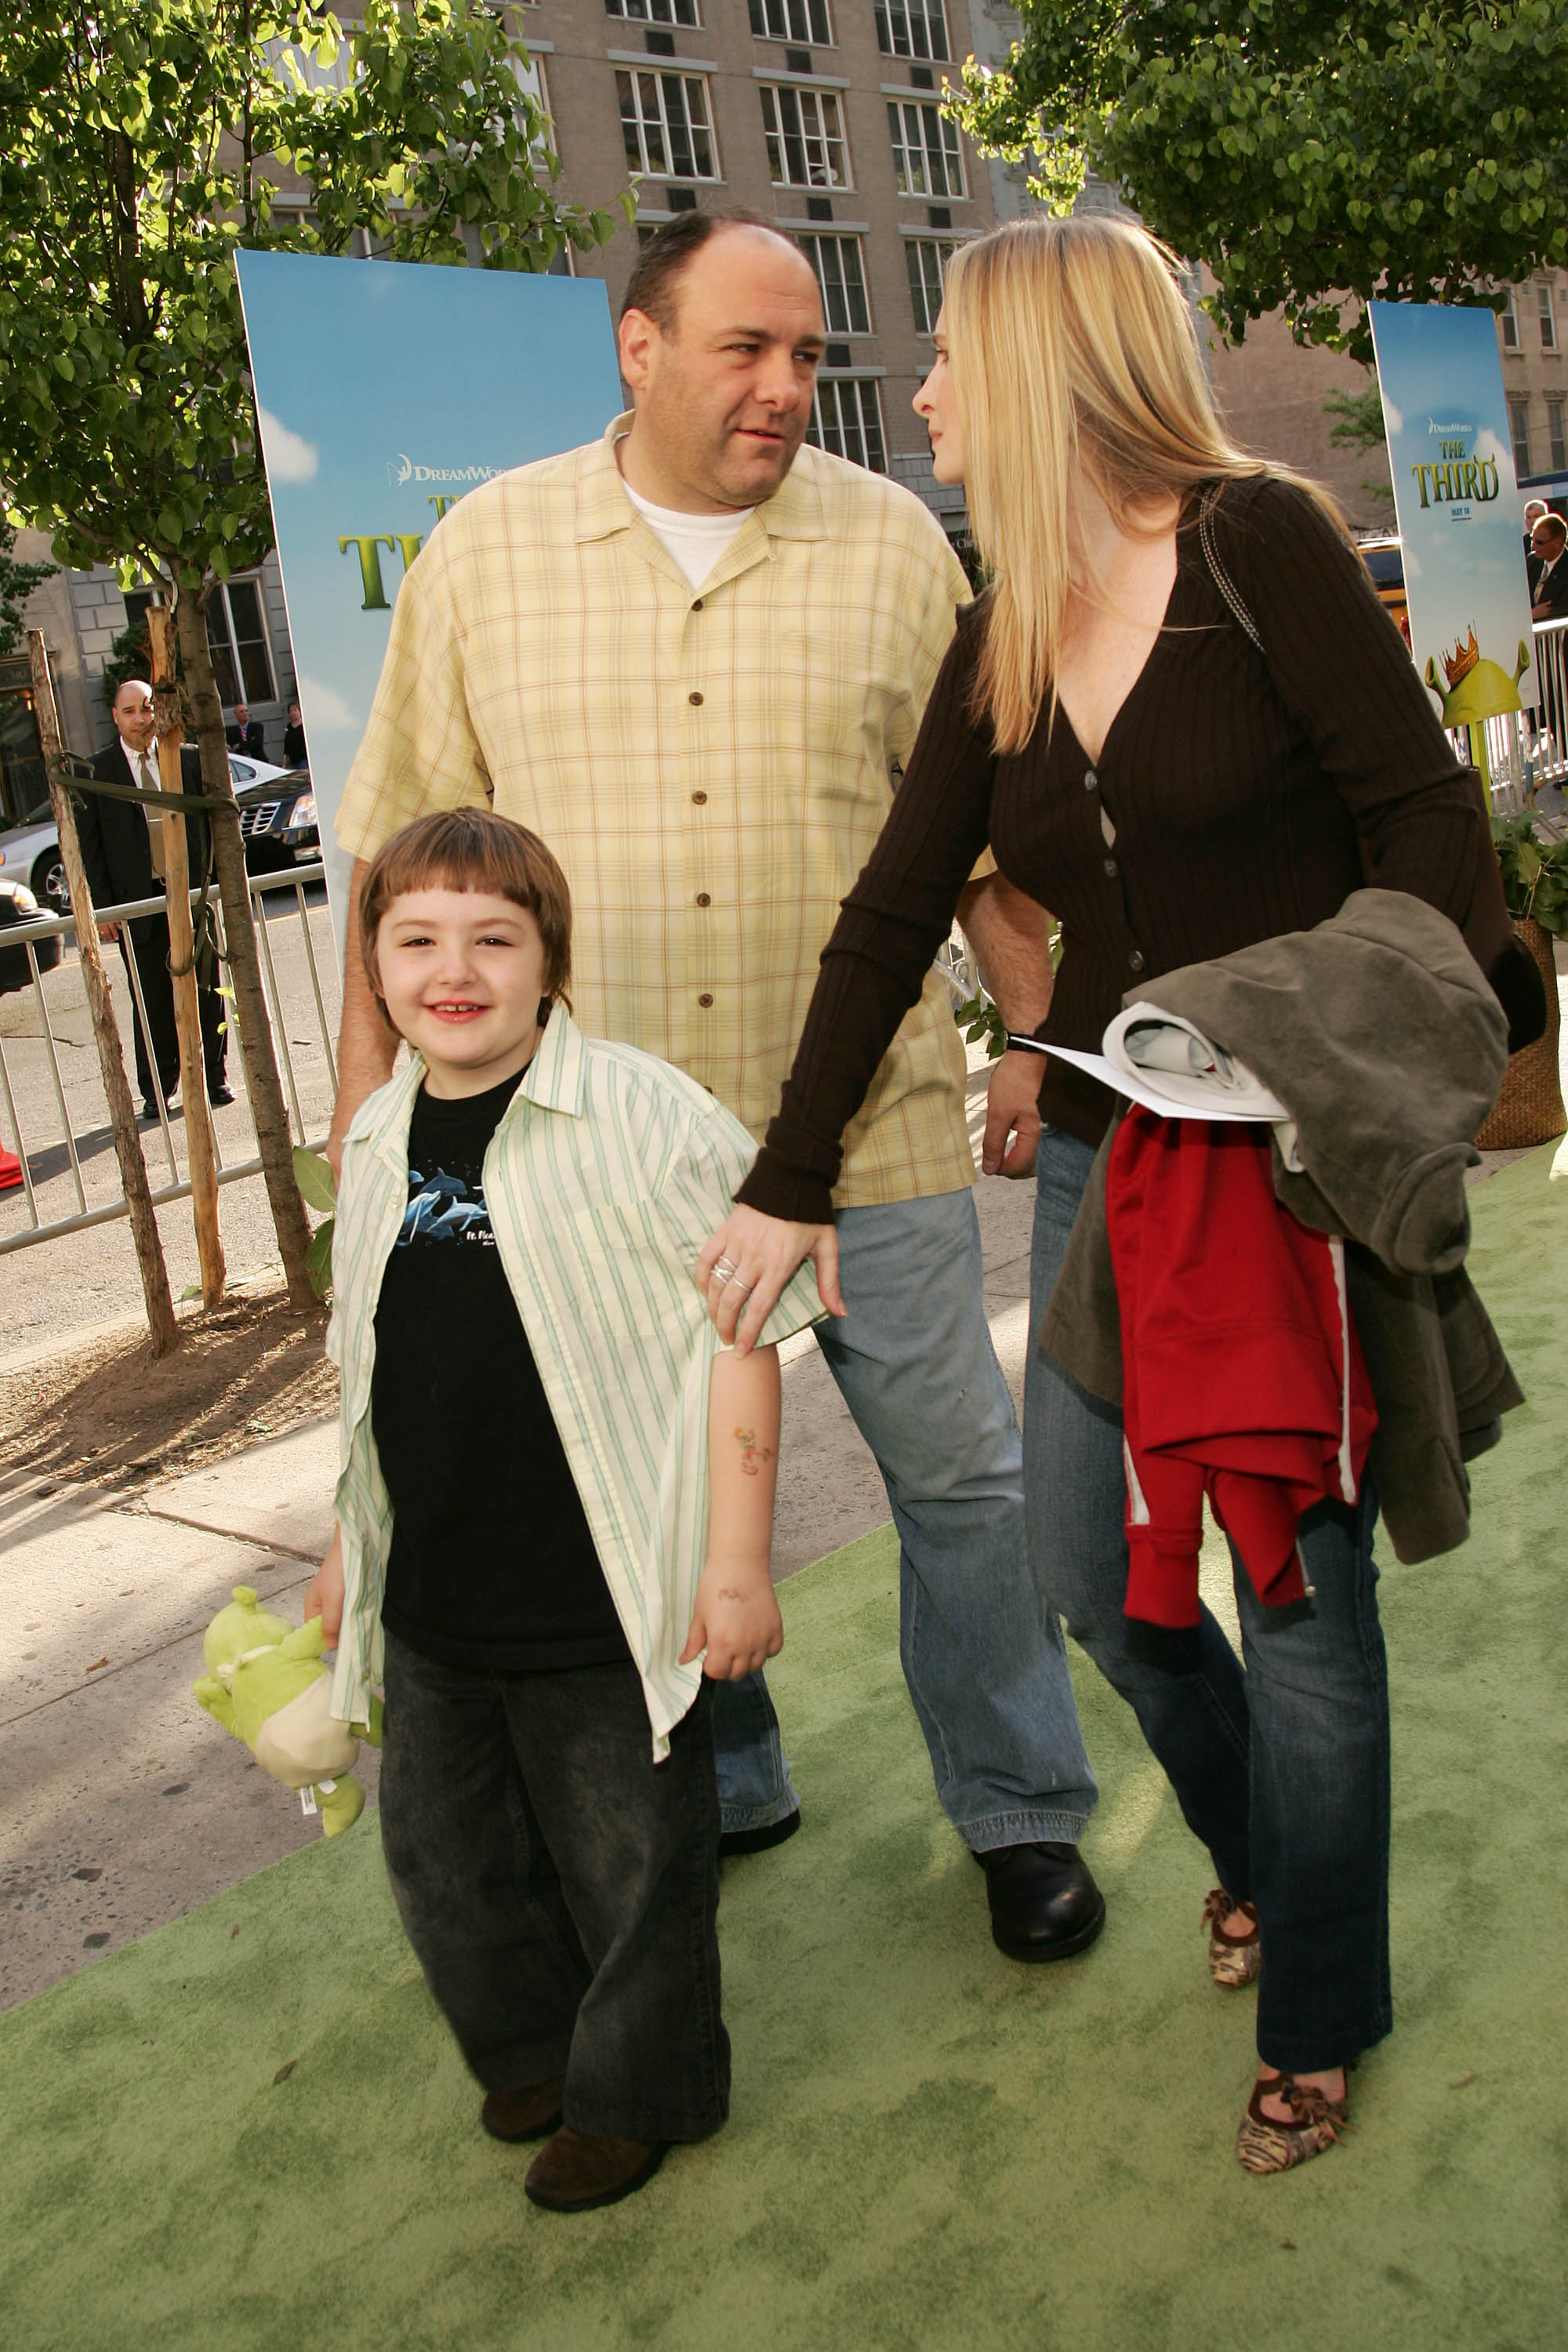 James Gandolfini, Marcy Wudarski, and their son Michael Gandolfini attend the premiere of "Shrek The Third" at Clearview Chelsea West Cinemas on May 14, 2007, in New York City. | Source: Getty Images